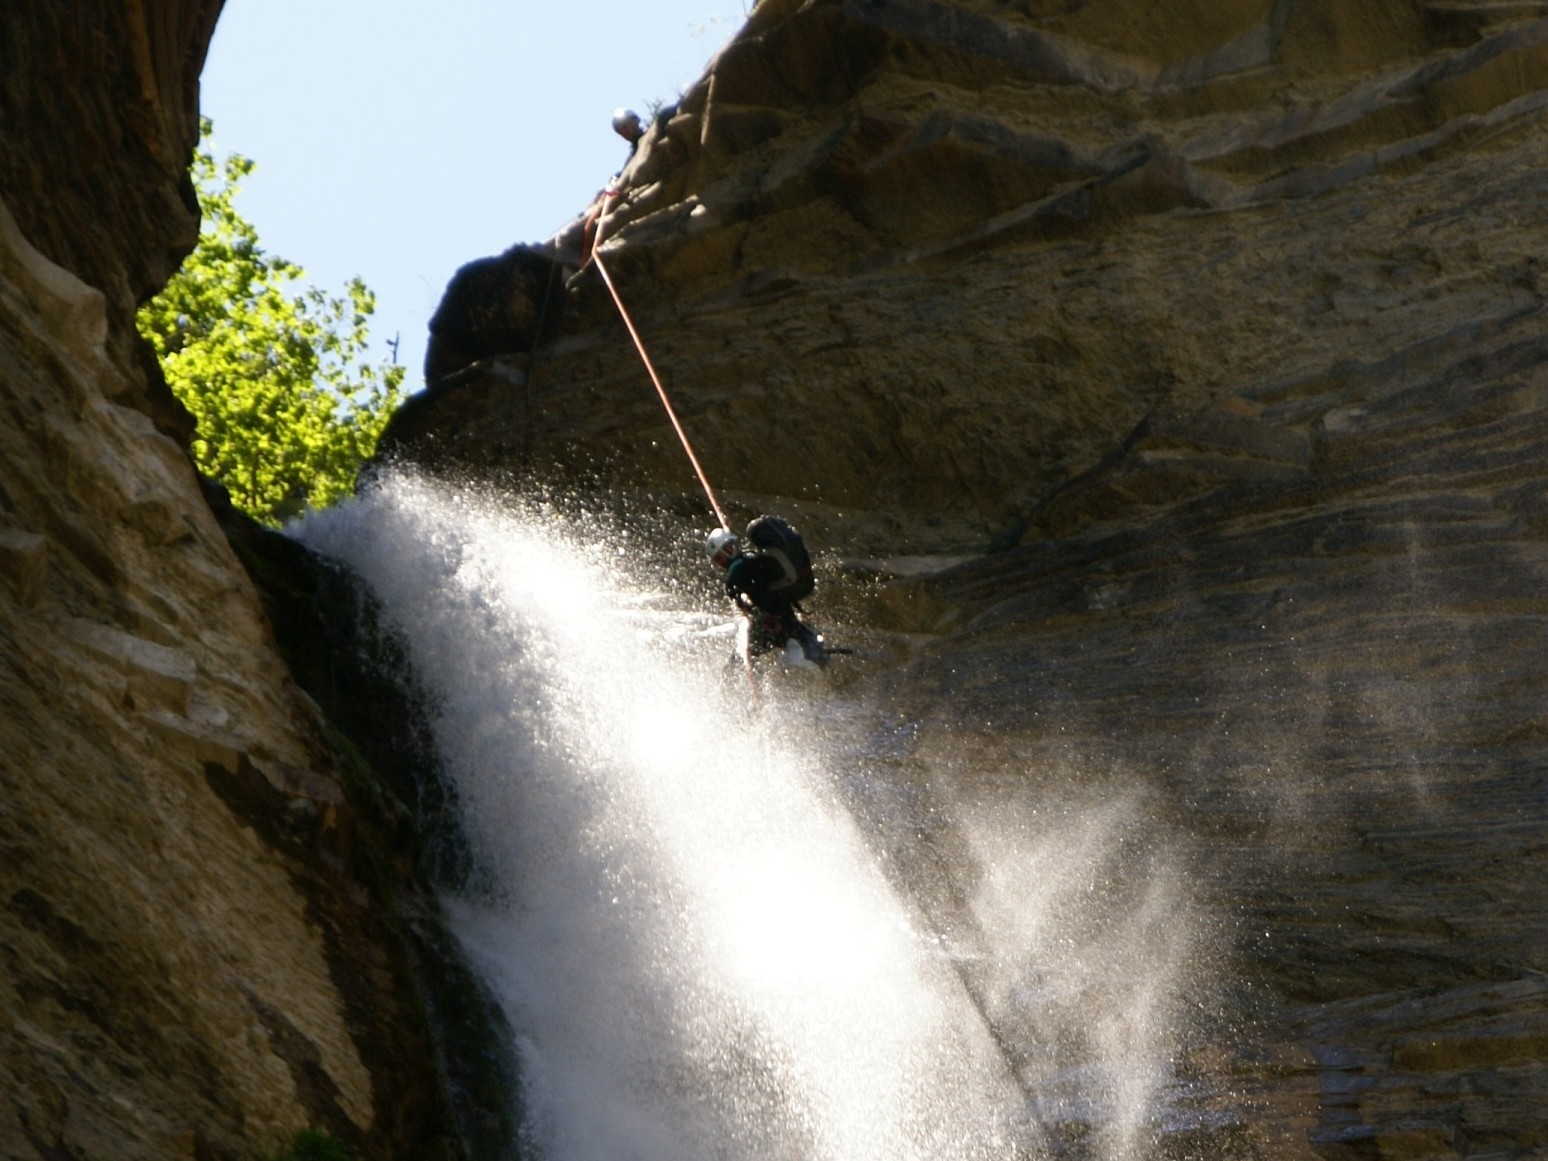 <p>CANYONING NIVEAU <strong><span style="font-size:18px"><span style="font-family:comic sans ms,cursive">3</span></span></strong></p> 